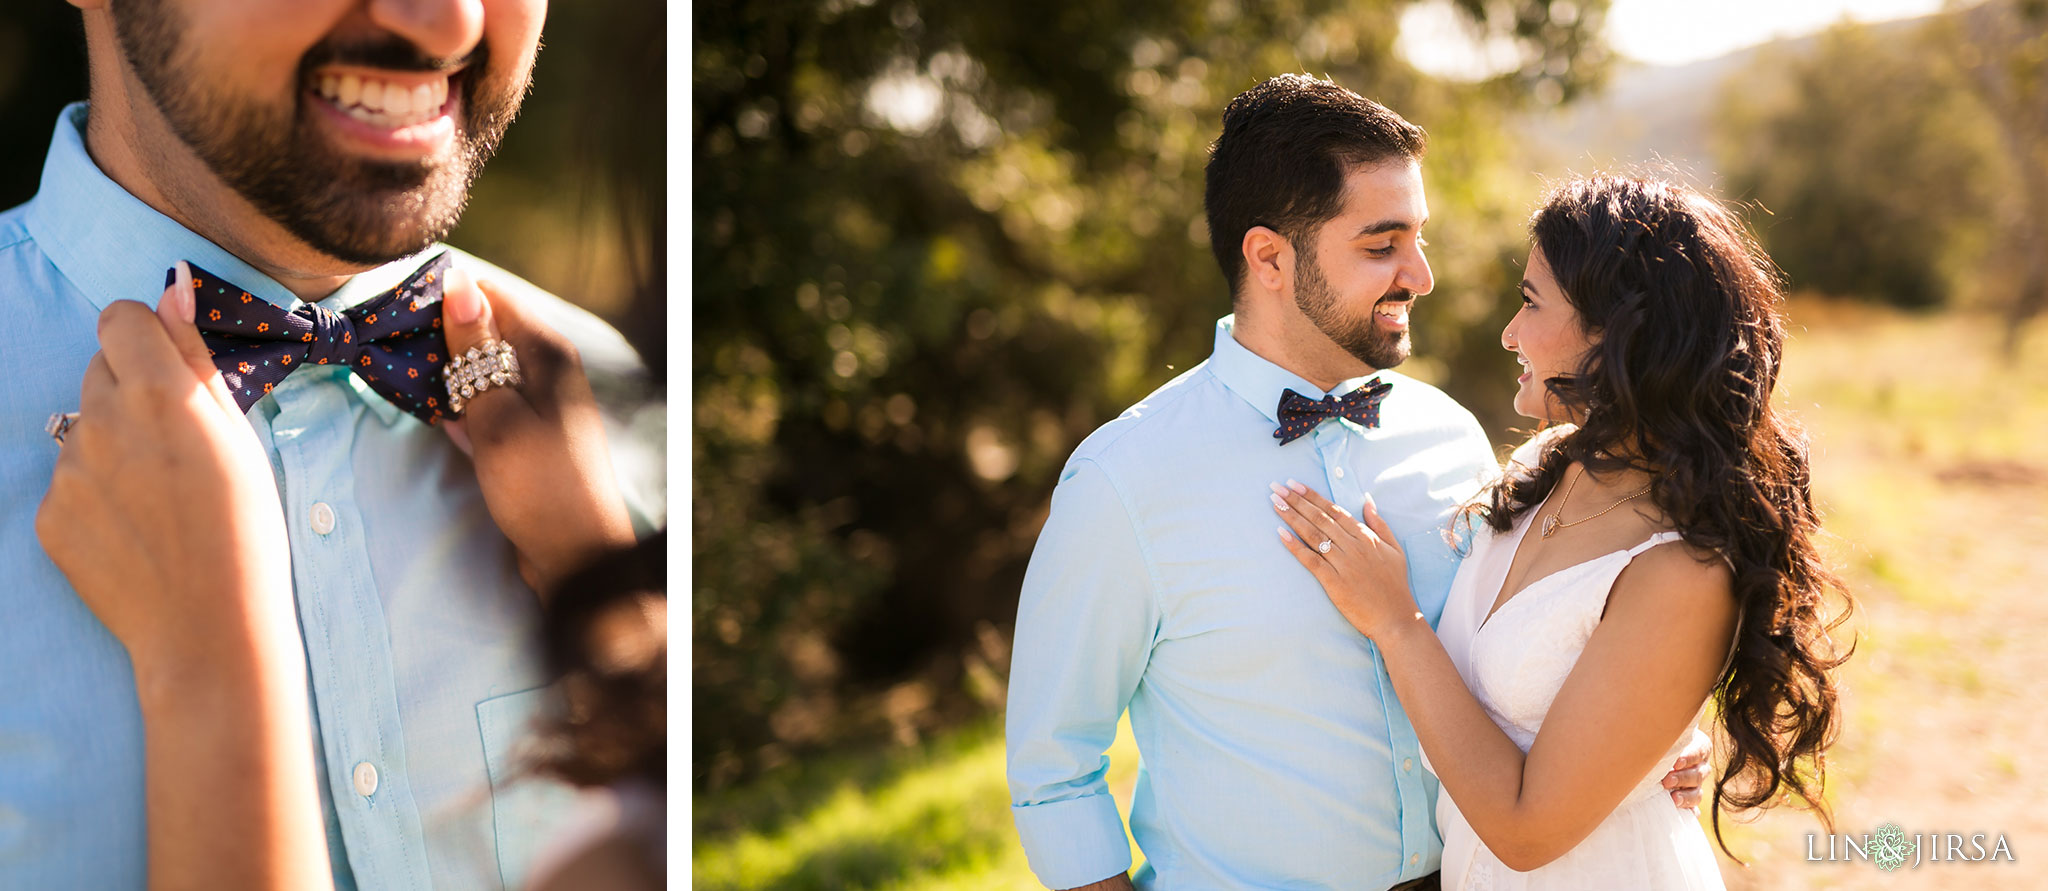 01 james dilley preserve orange county engagement photography